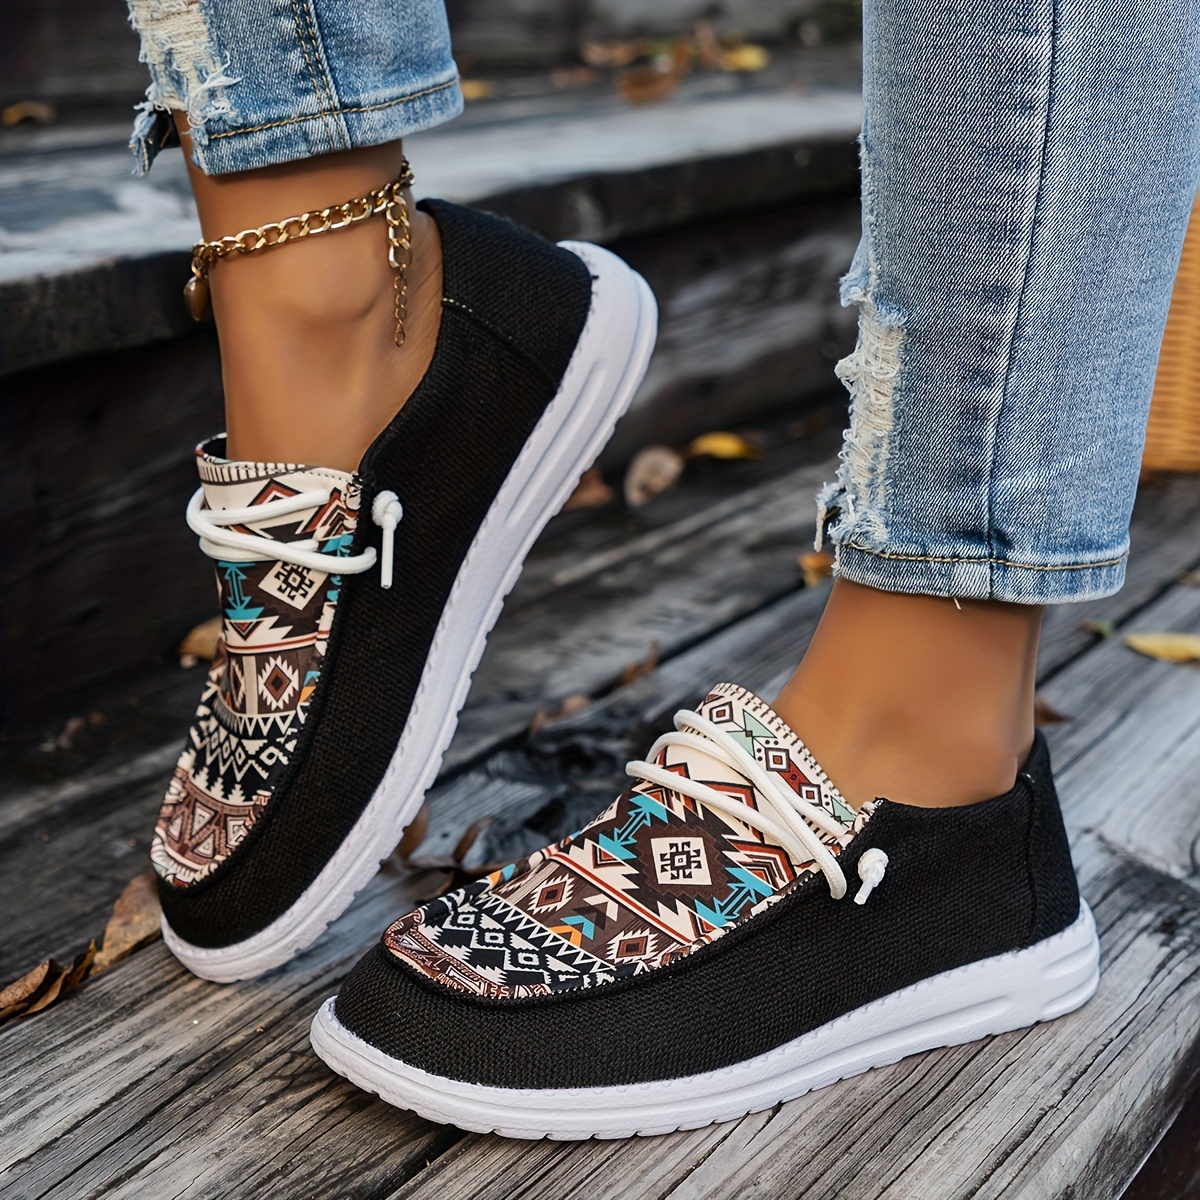 

Women's Tribal Print Canvas Shoes, Lightweight Round Toe Low Top Sneakers, Casual Outdoor Walking Flat Shoes